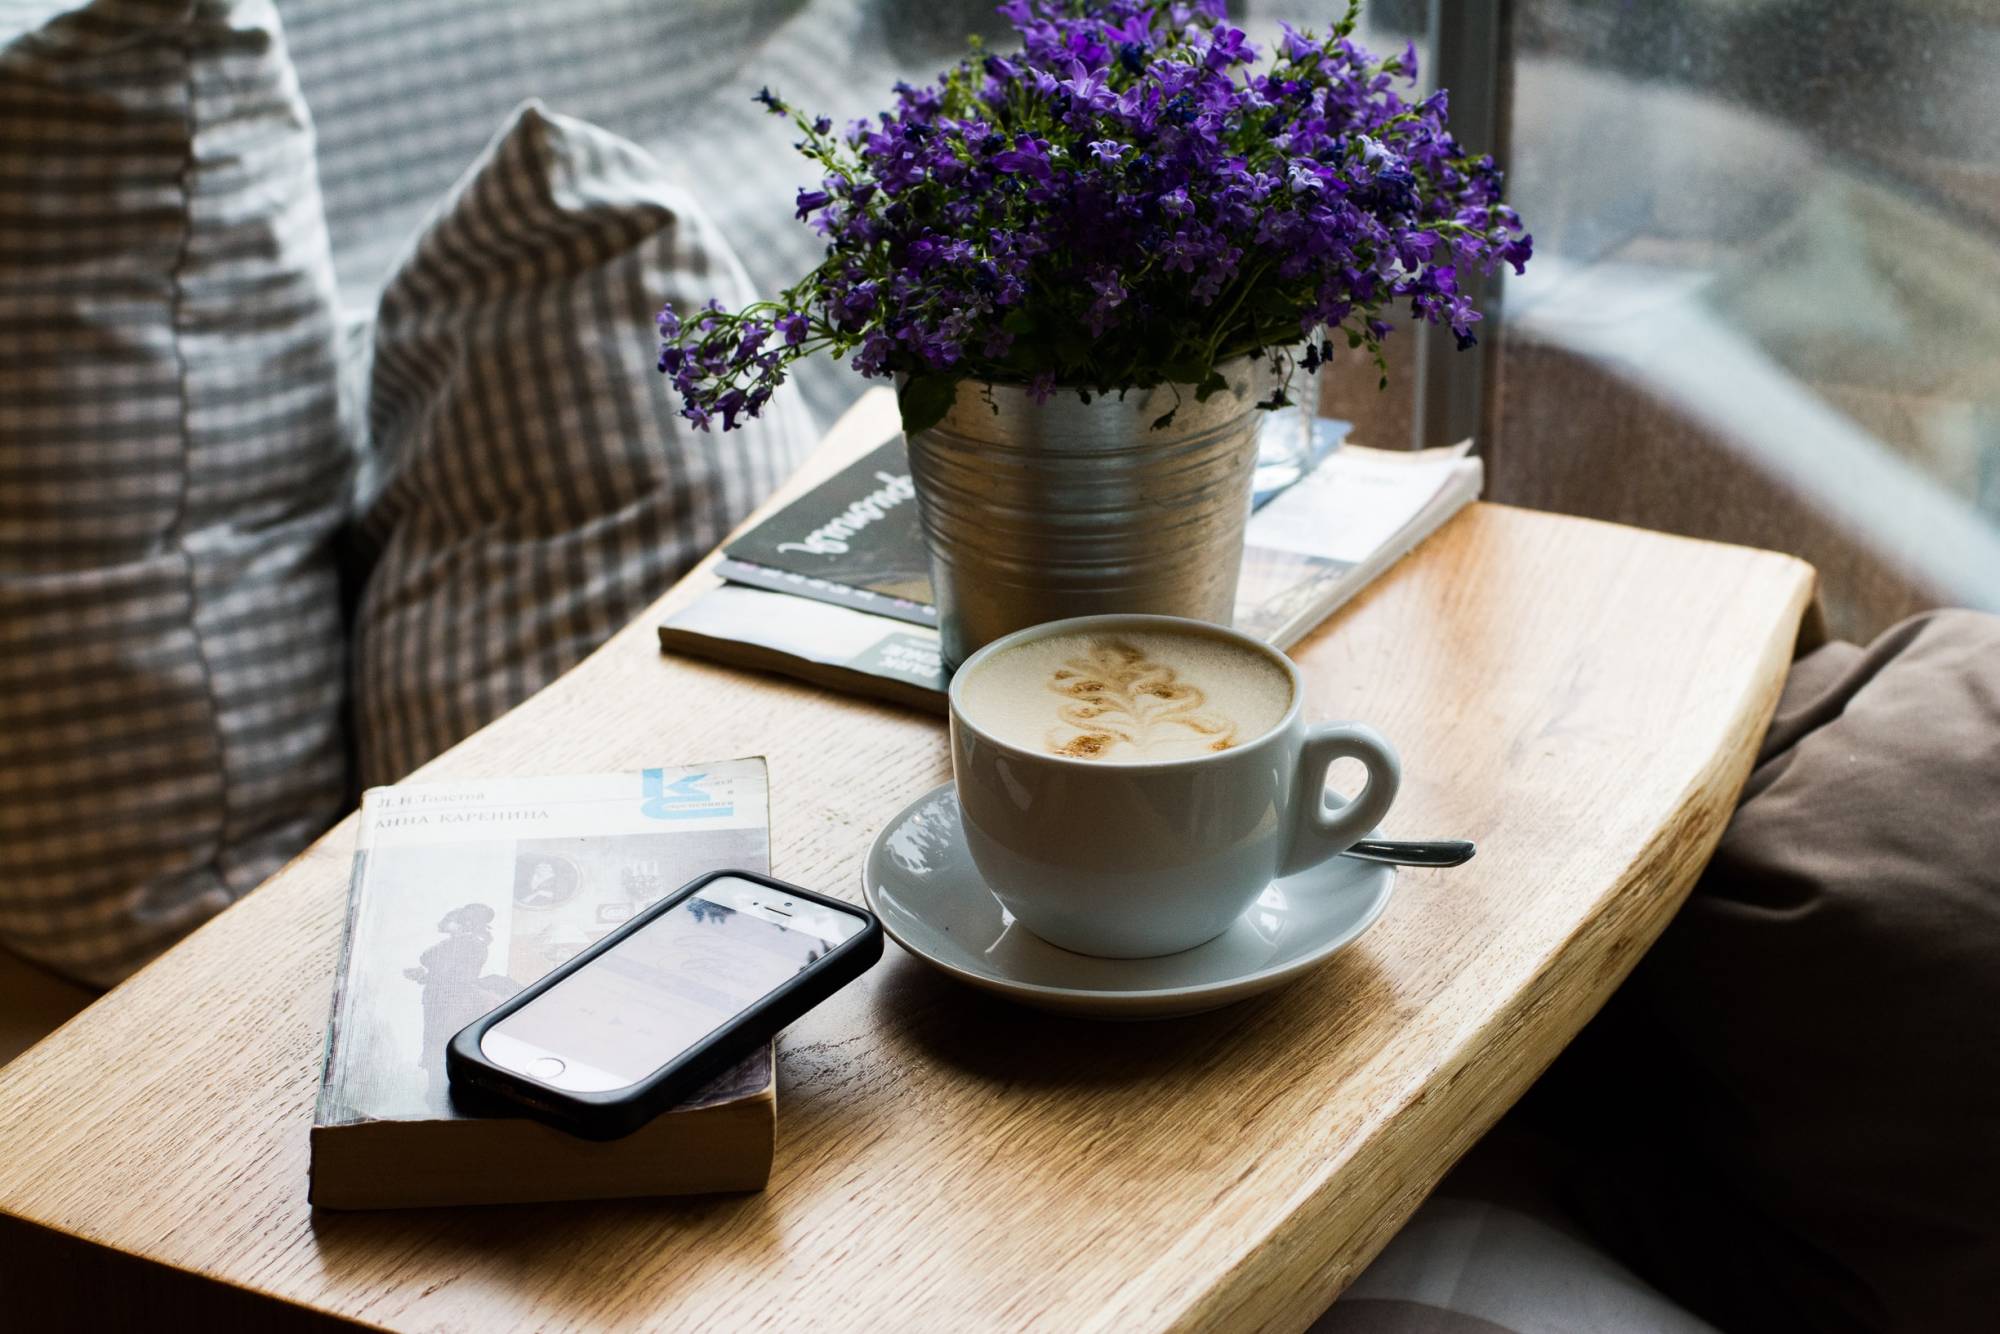 A coffee table with a book, phone and cup of coffee